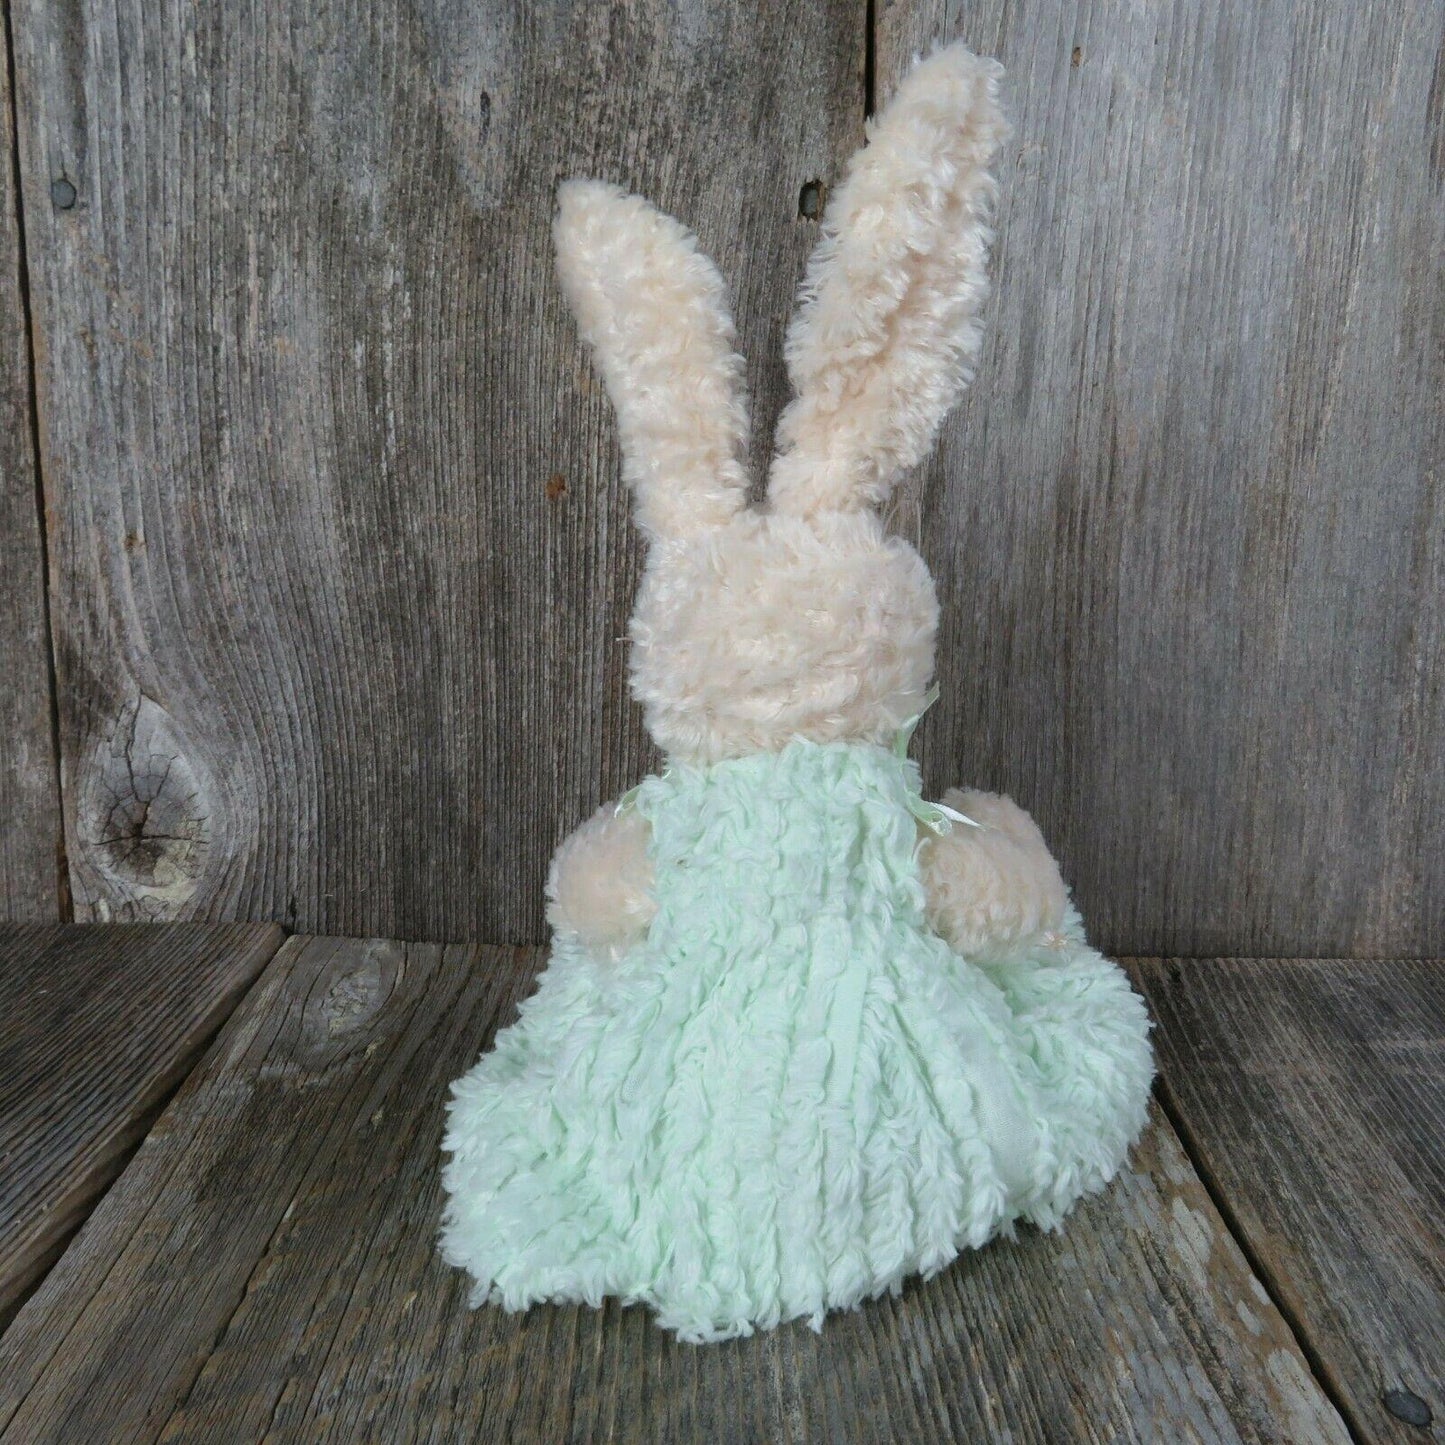 White Bunny with Green Dress Jointed Plush Unipak Rabbit Stuffed Animal Easter